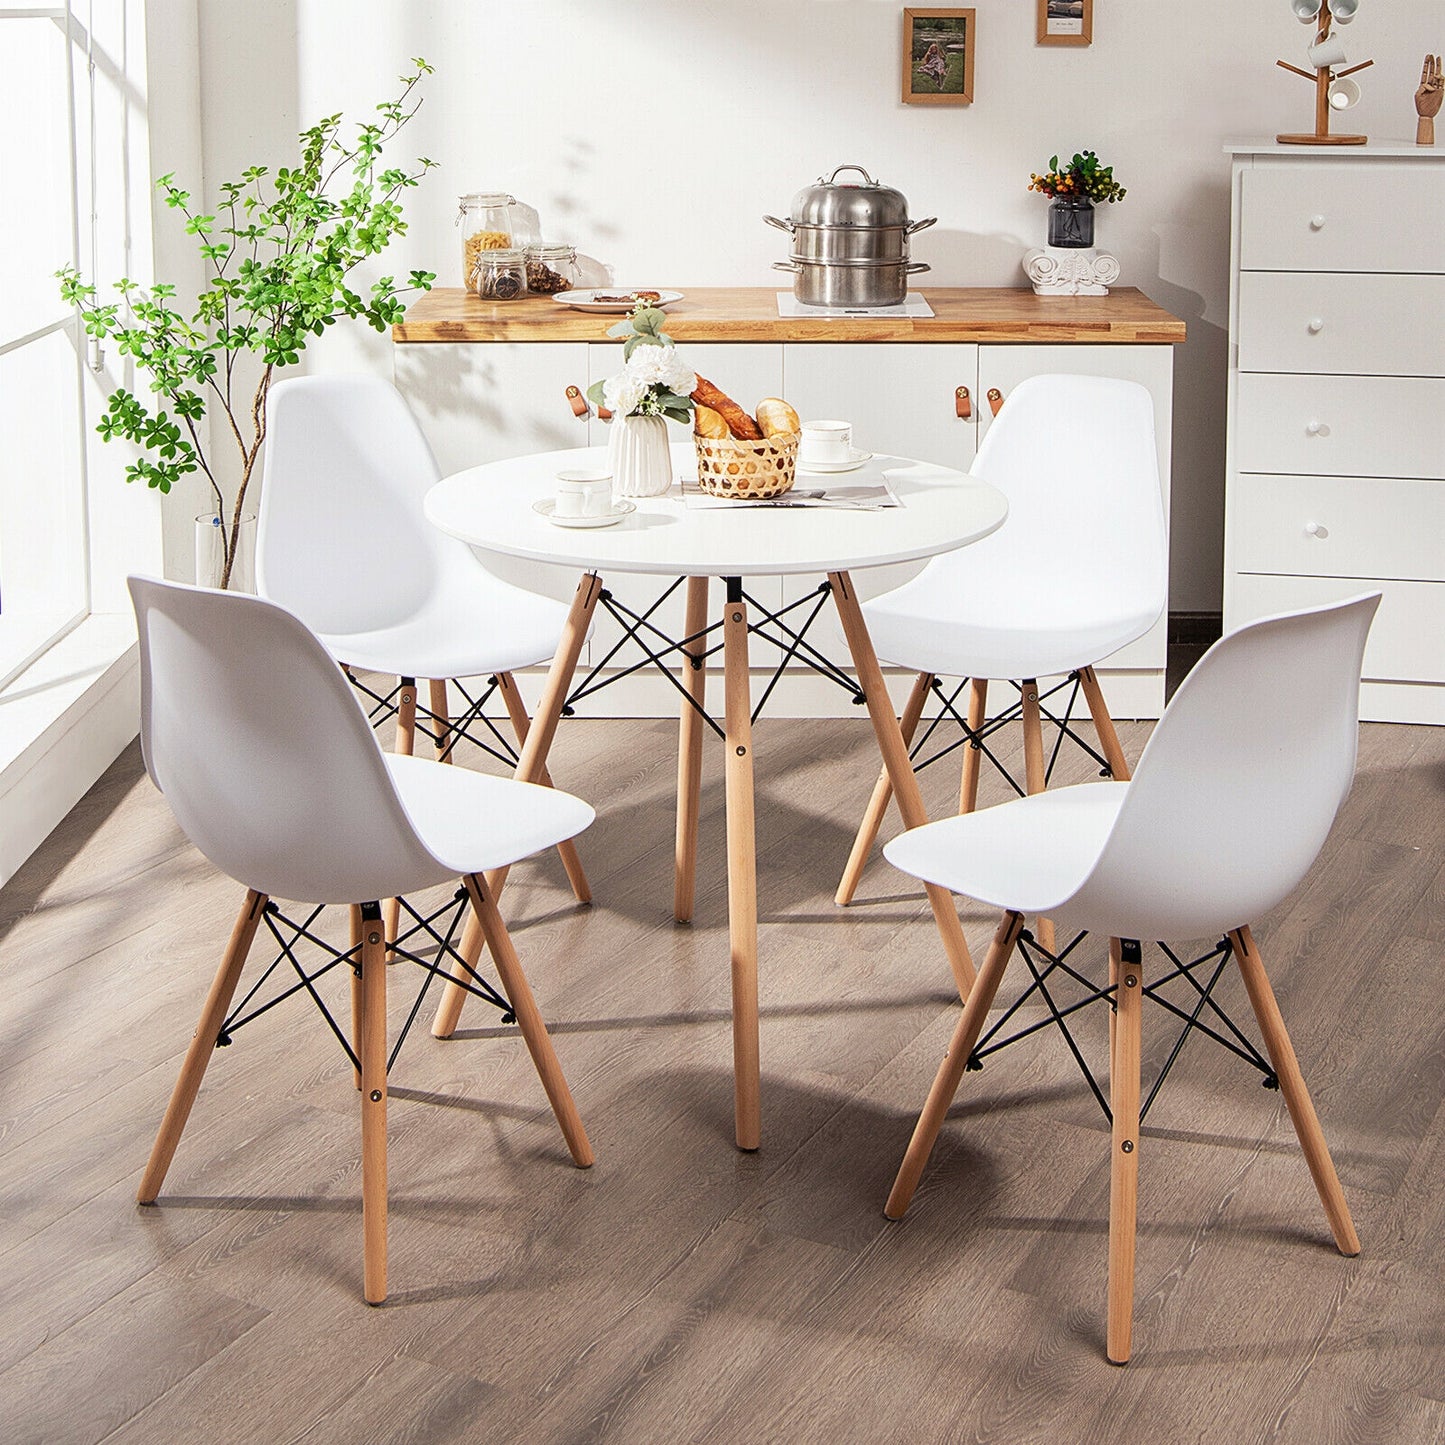 5 Pieces Table Set With Solid Wood Leg For Dining Room-White